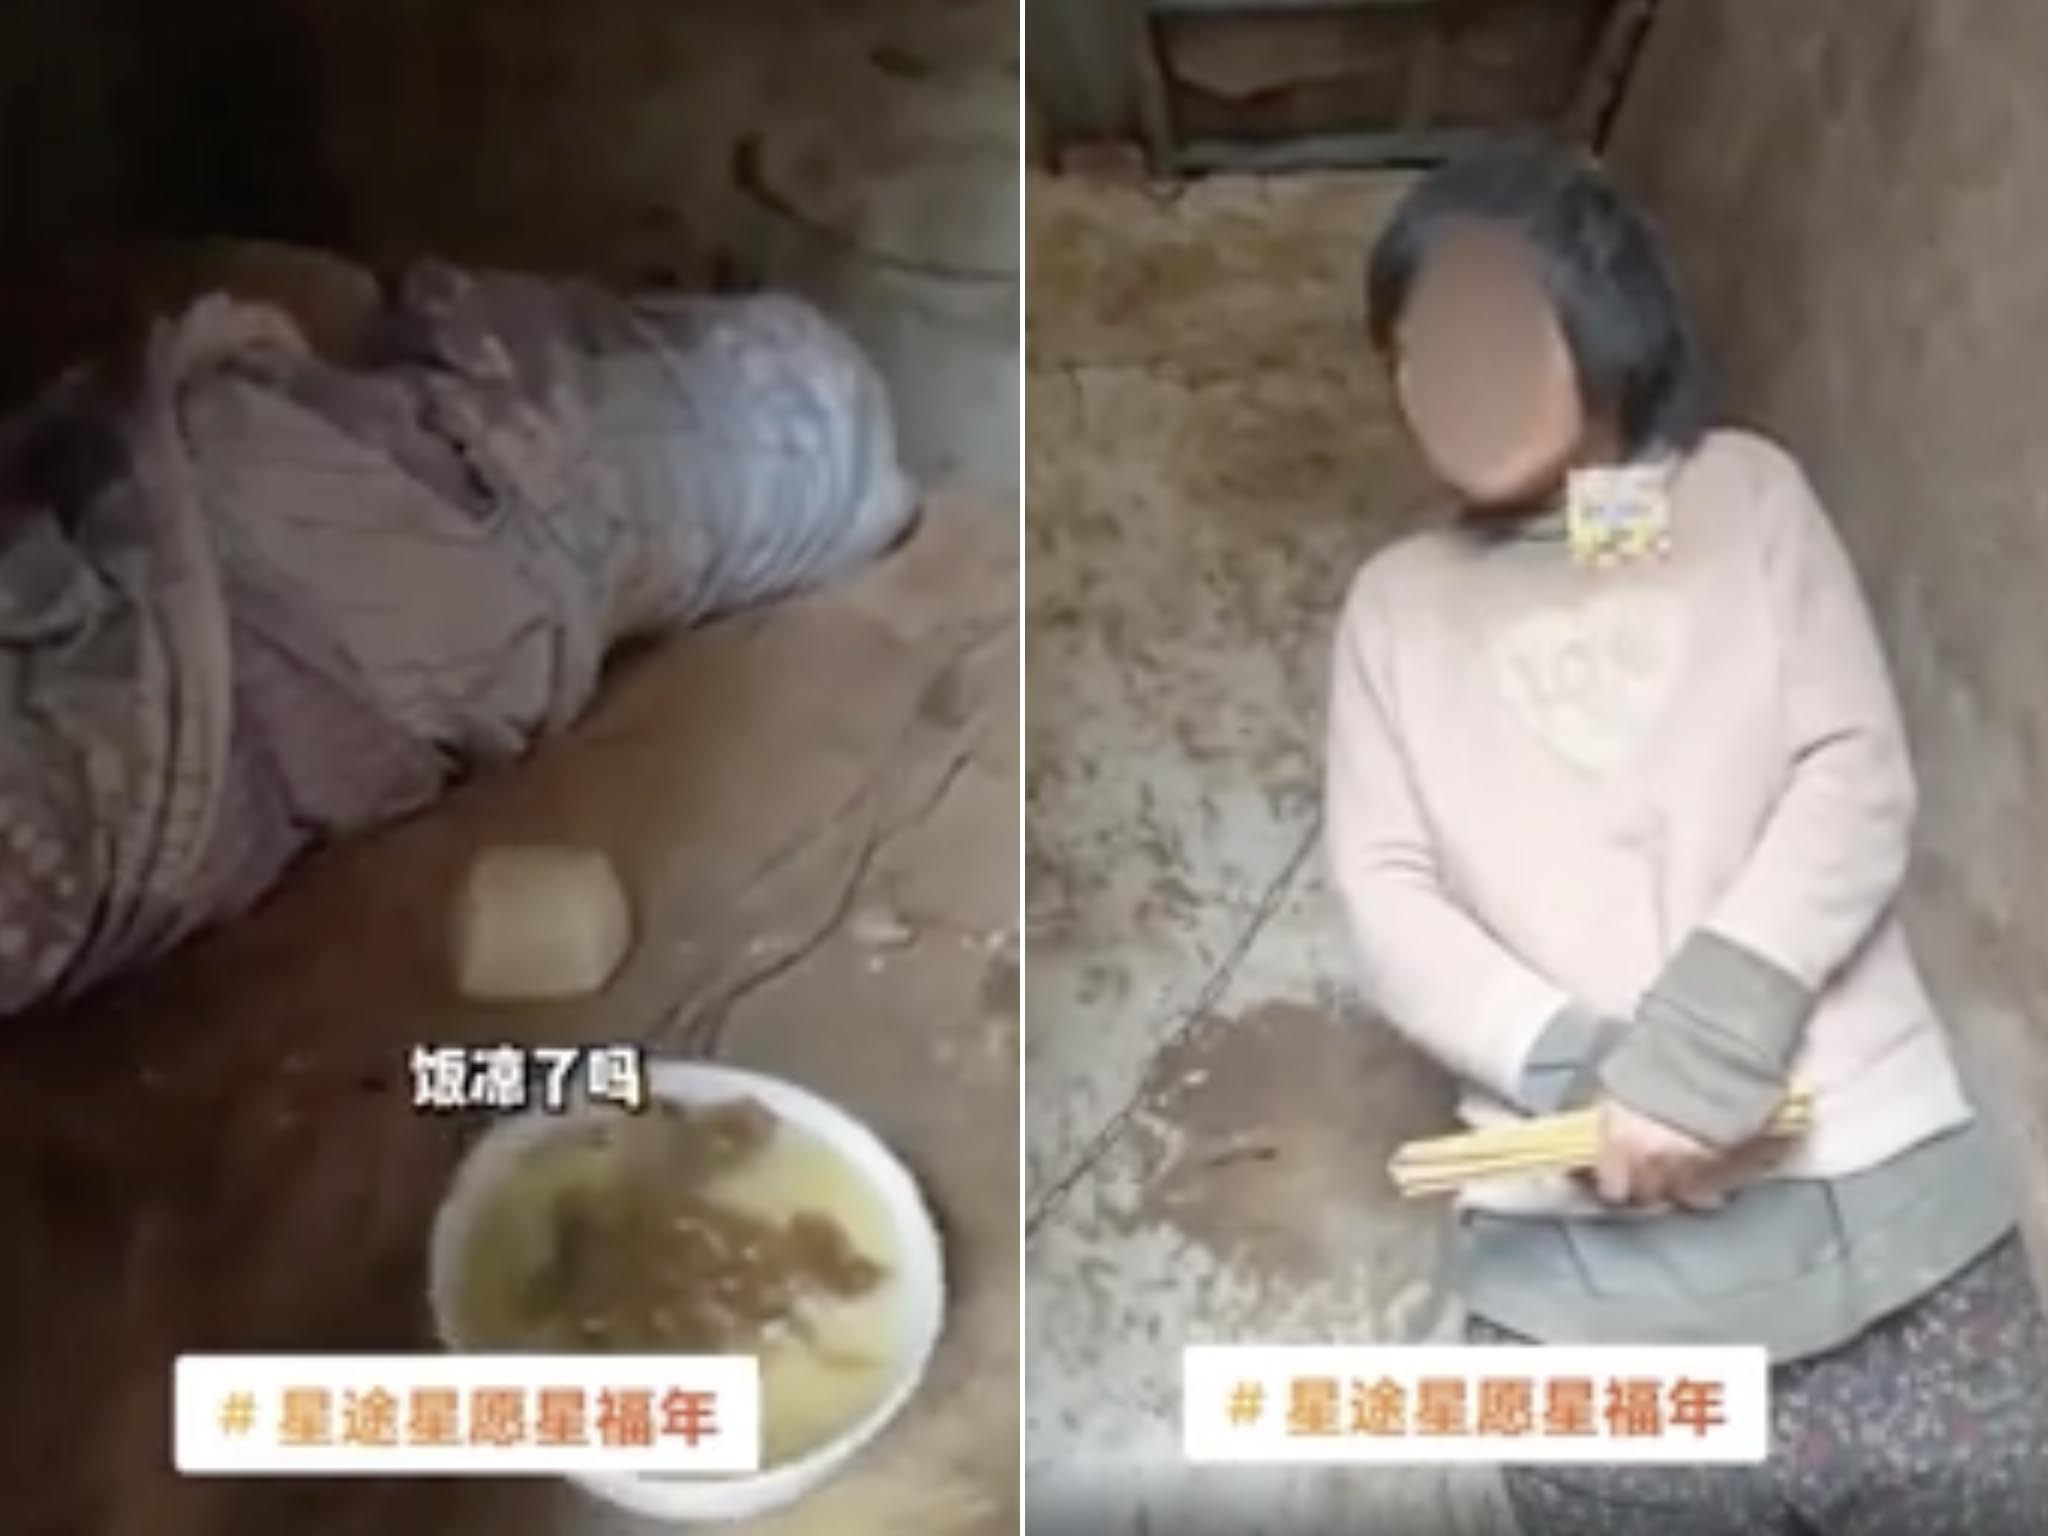 The video has gone viral with Chinese citizens demanding that authorities help the woman